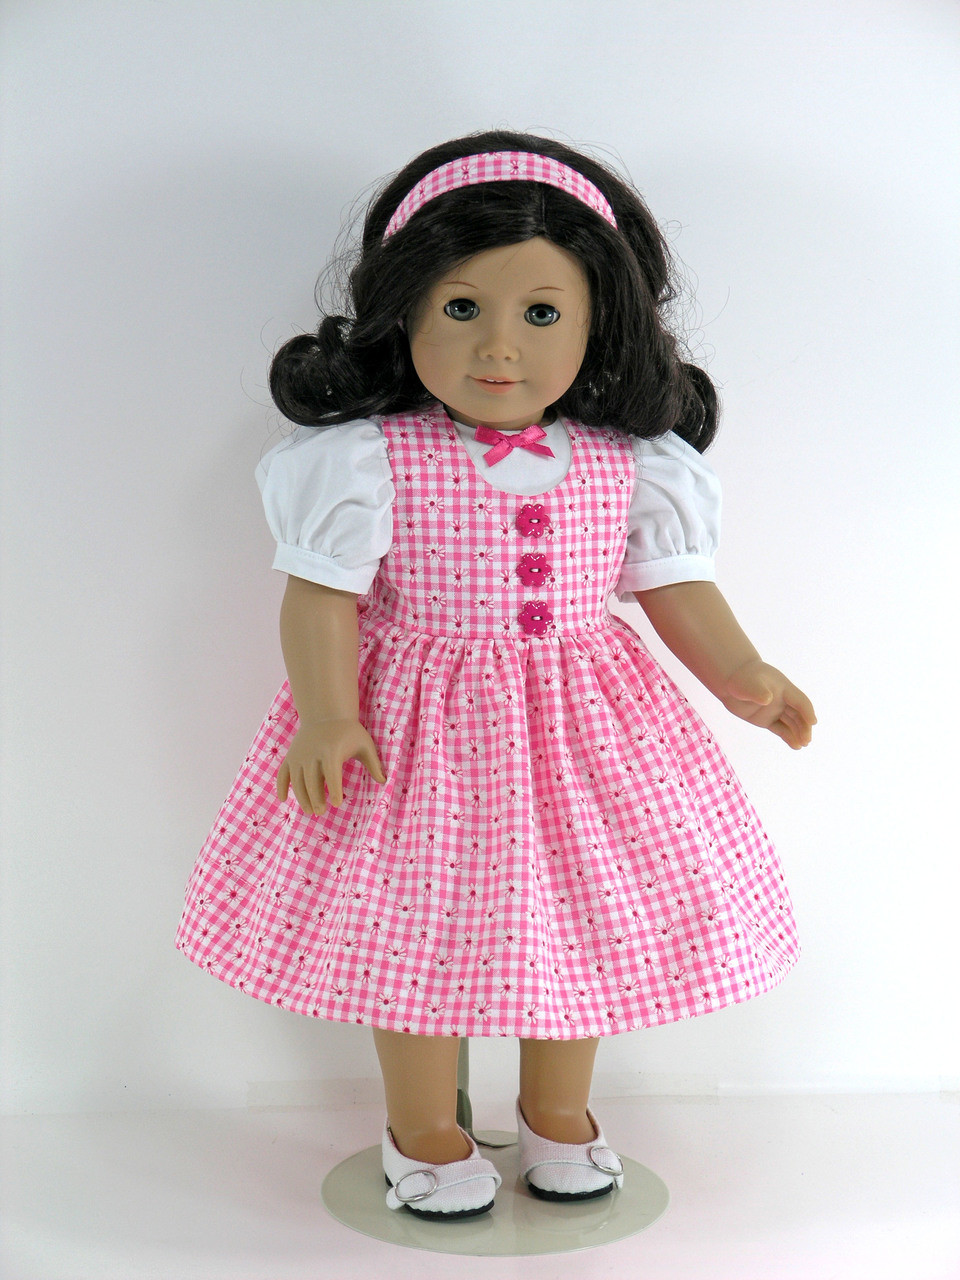 Handmade 18 inch Doll Clothes for American Girl - Sundress or Jumper,  Blouse, Headband, Pantaloons - Pink Check - Exclusively Linda Doll Clothes